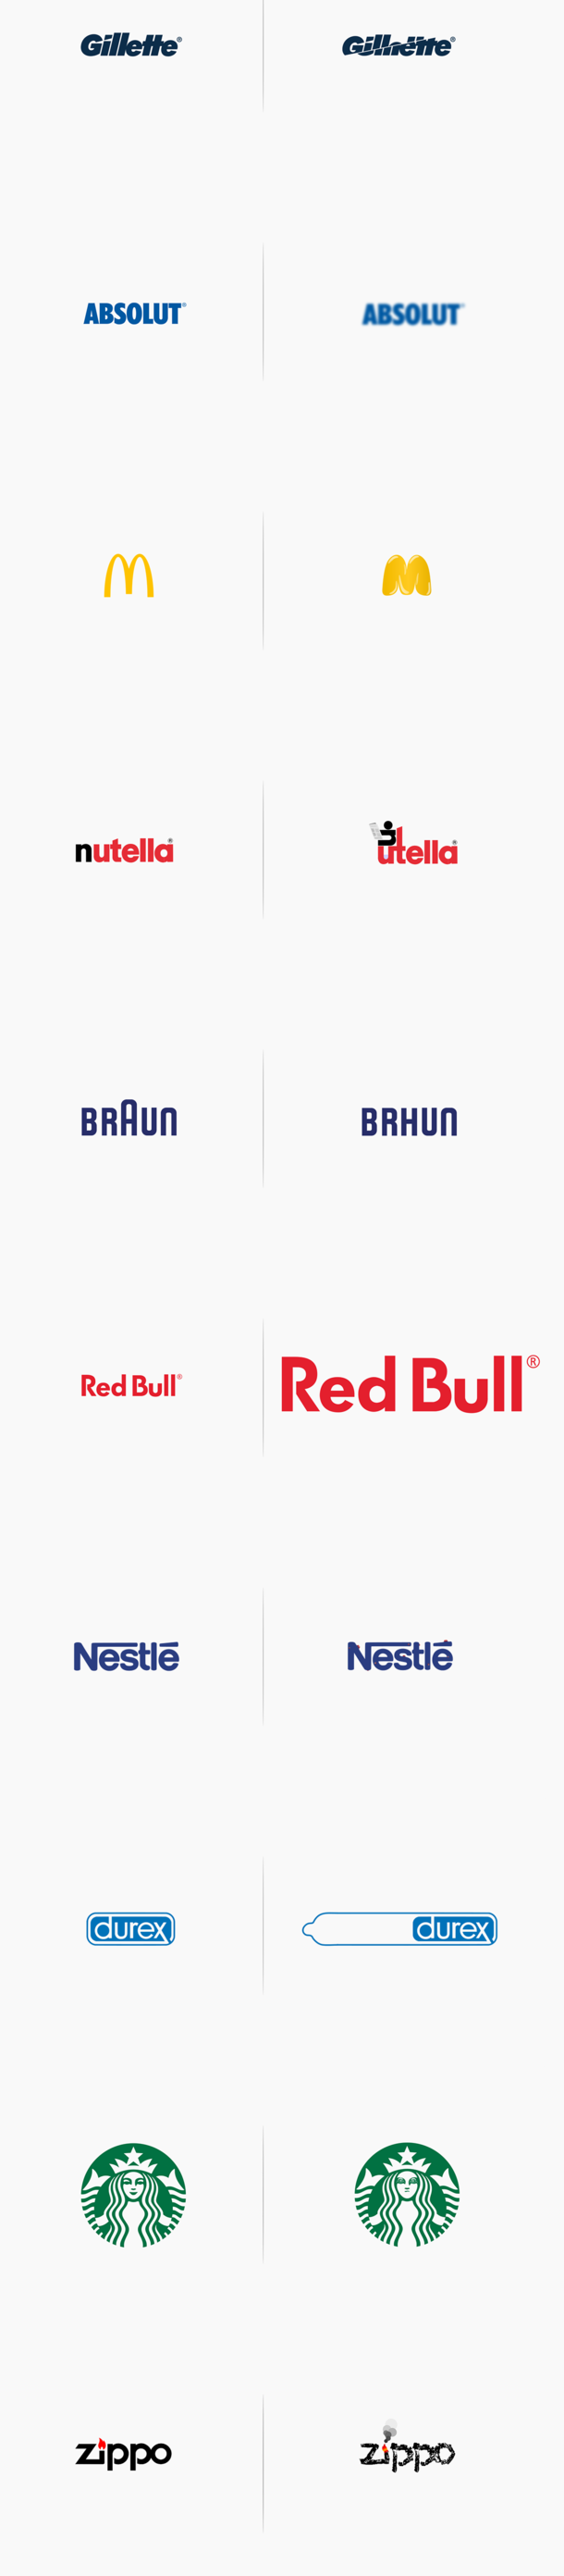 Logos affected by their products